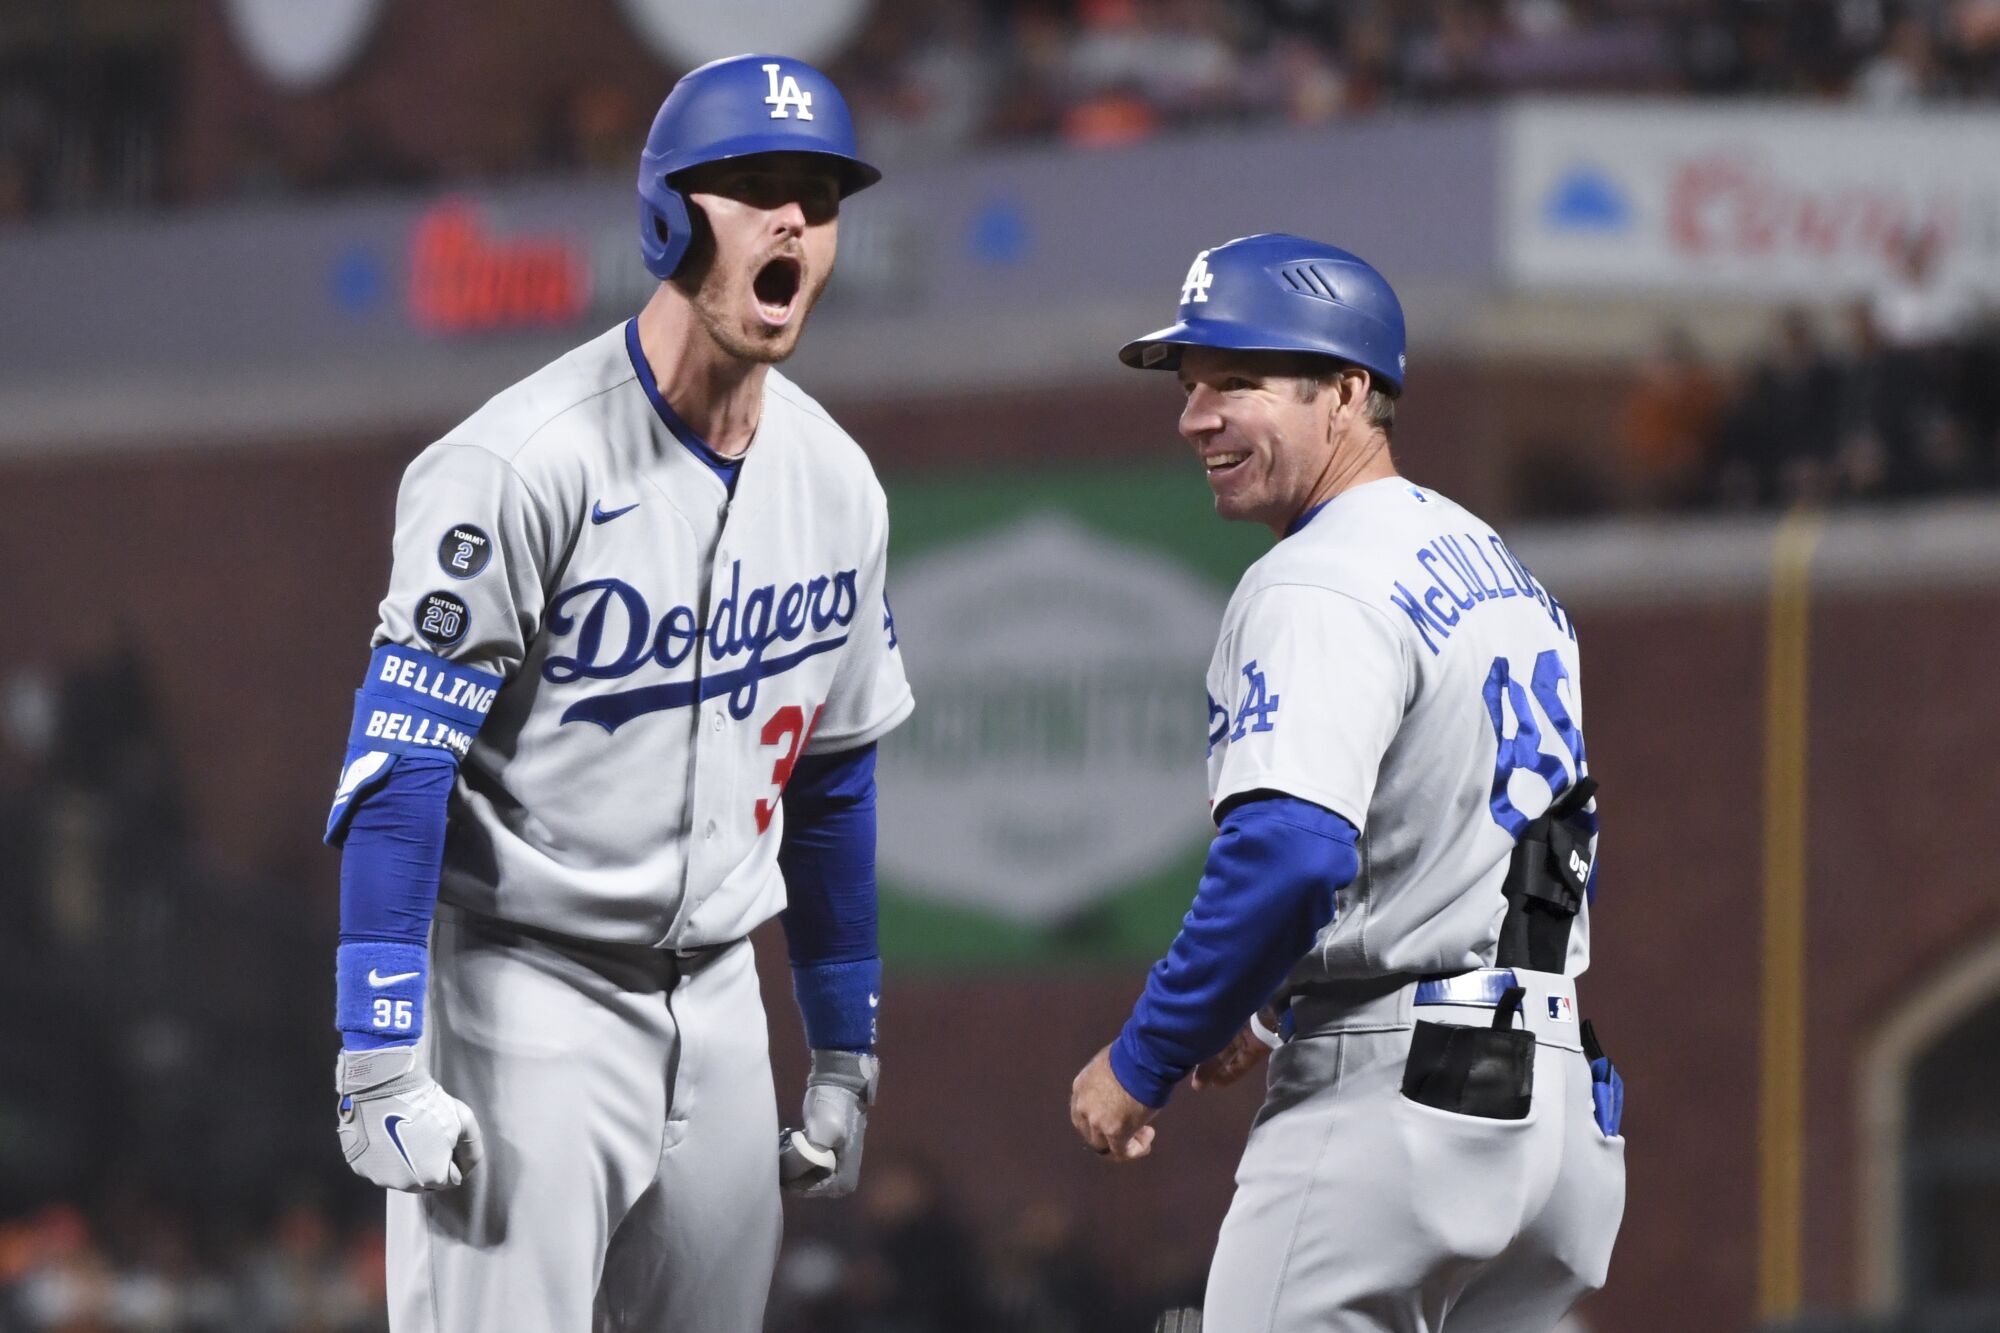 Cody Bellinger shouts toward the Dodgers' dugout after driving in the go-ahead run against the San Francisco Giants.